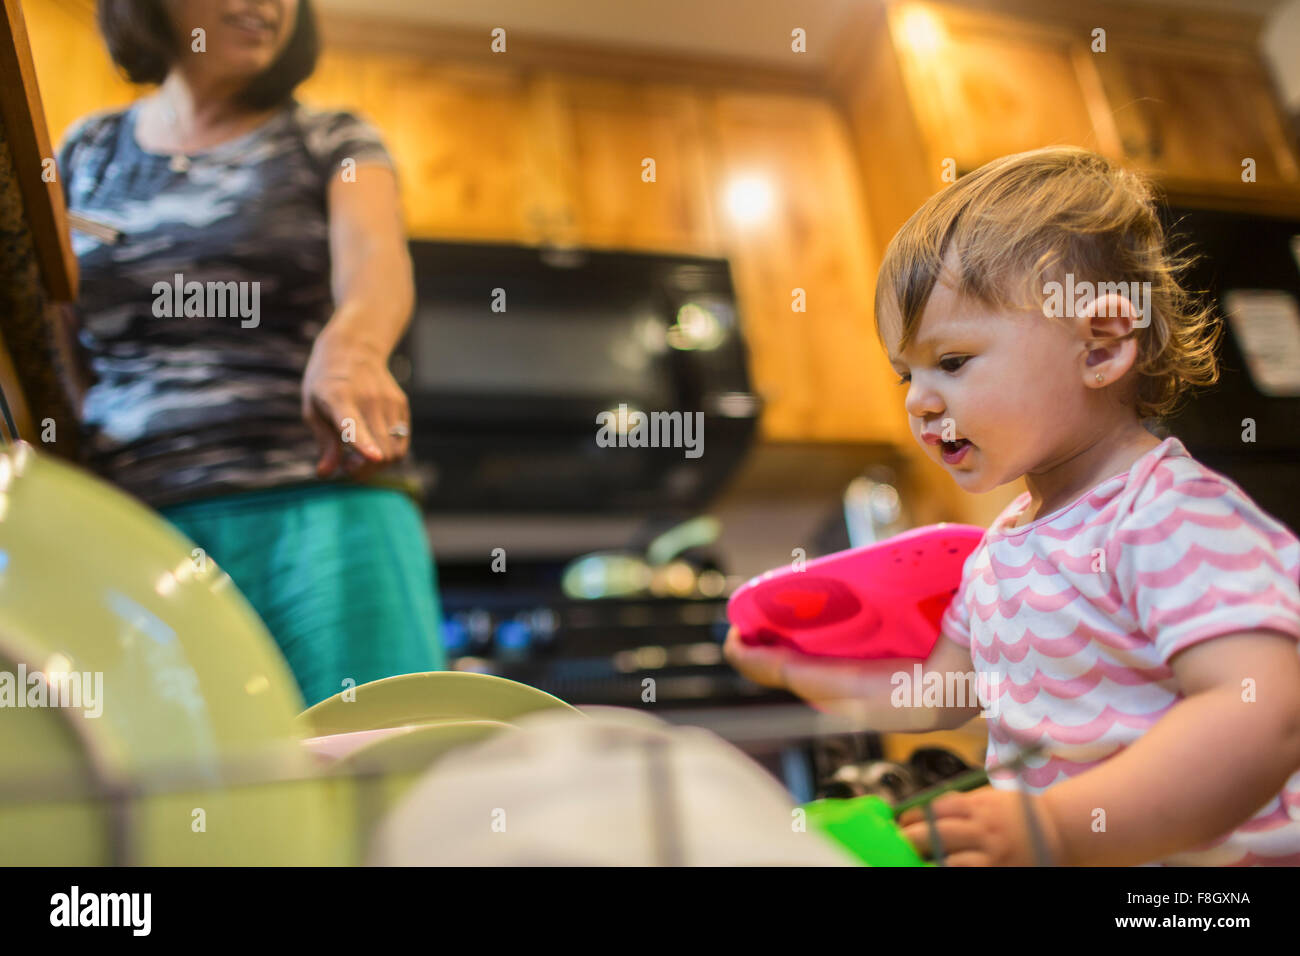 Baby girl helping mother load dishwasher Stock Photo